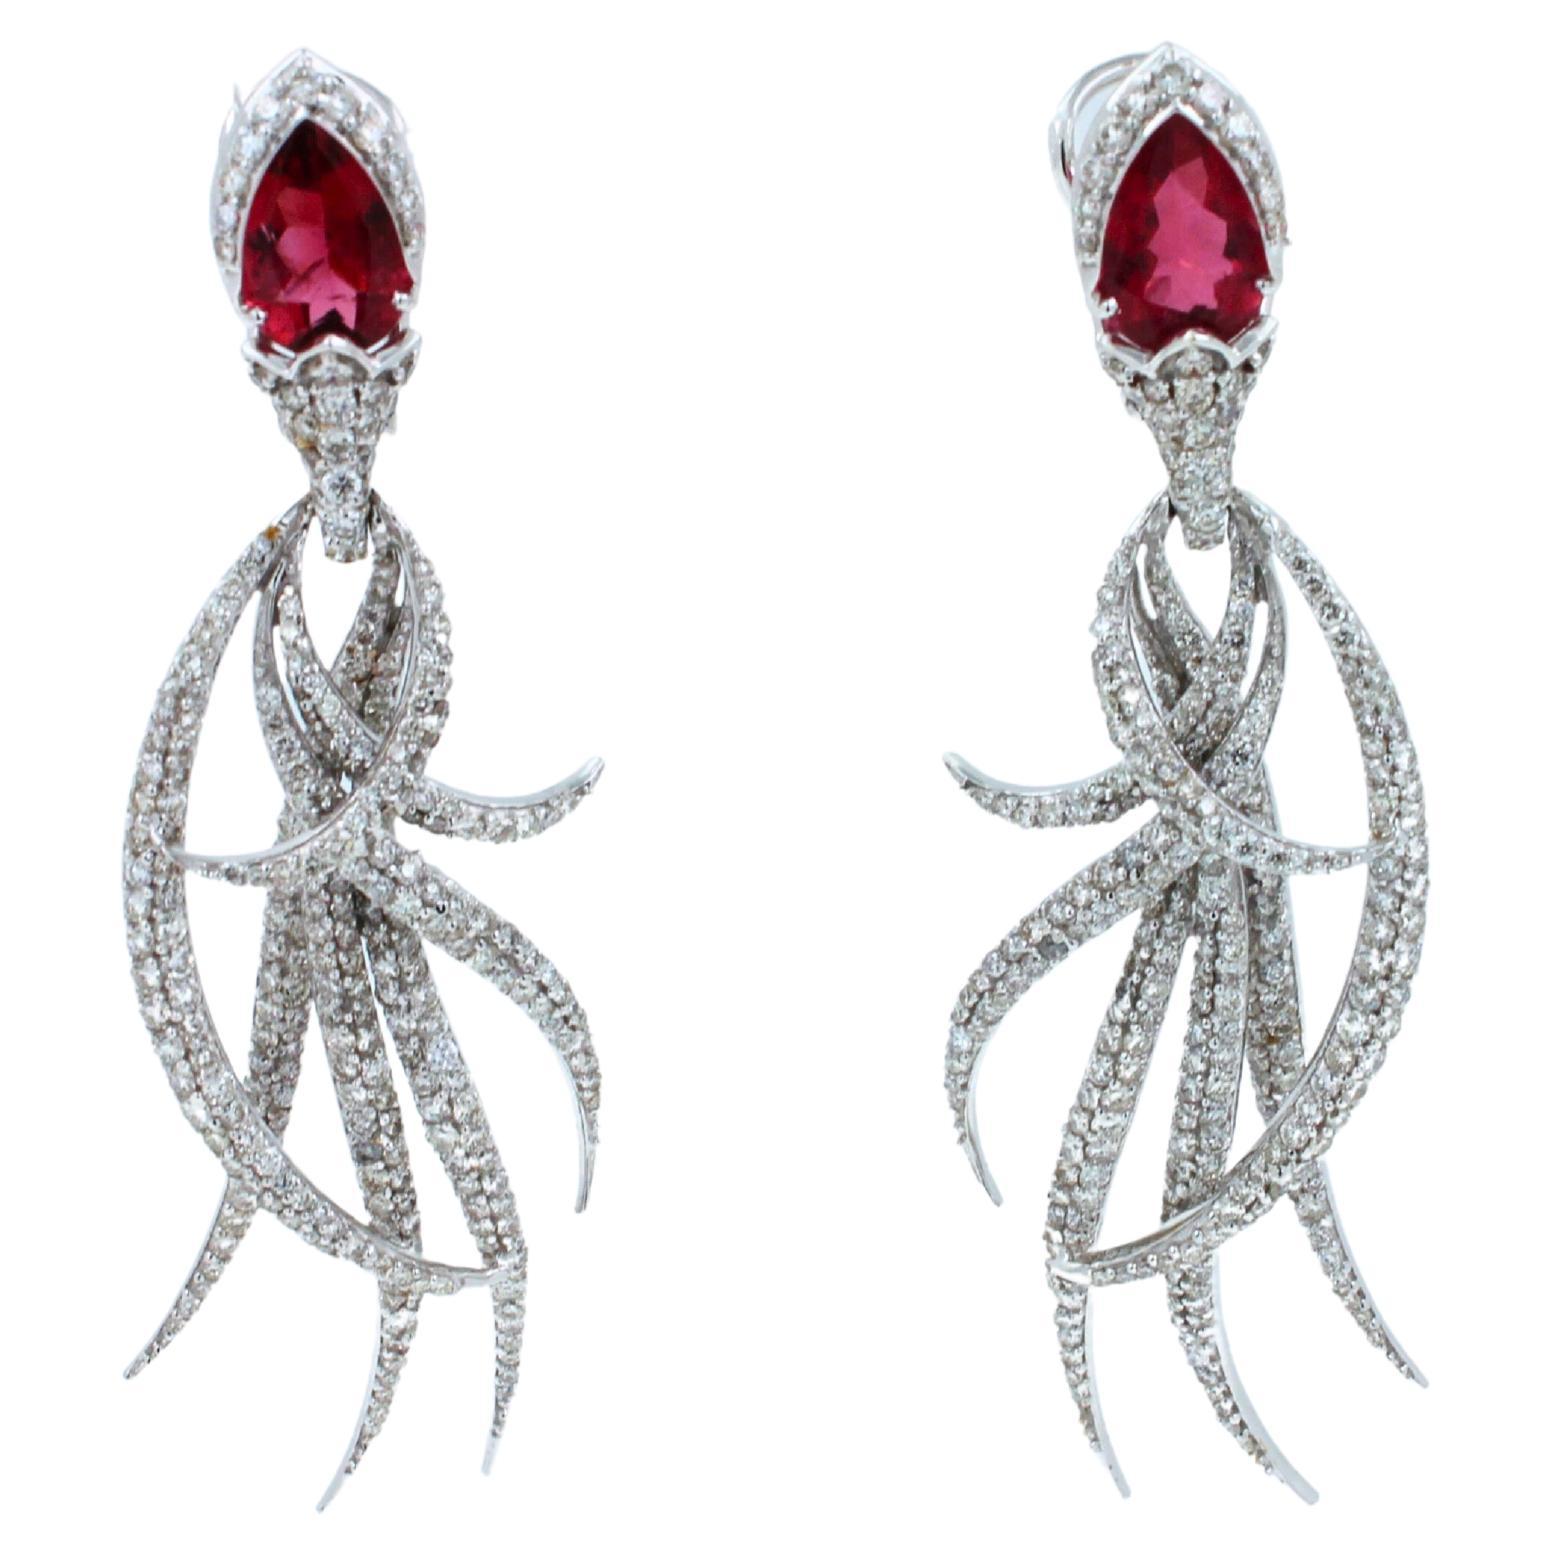 18 Karat White Gold
26 grams
2.70 inches length of earrings
Diamonds 7.50 cts
Red Pink Tourmalines
Pear Cut/Drop Shape
6.00 CTW